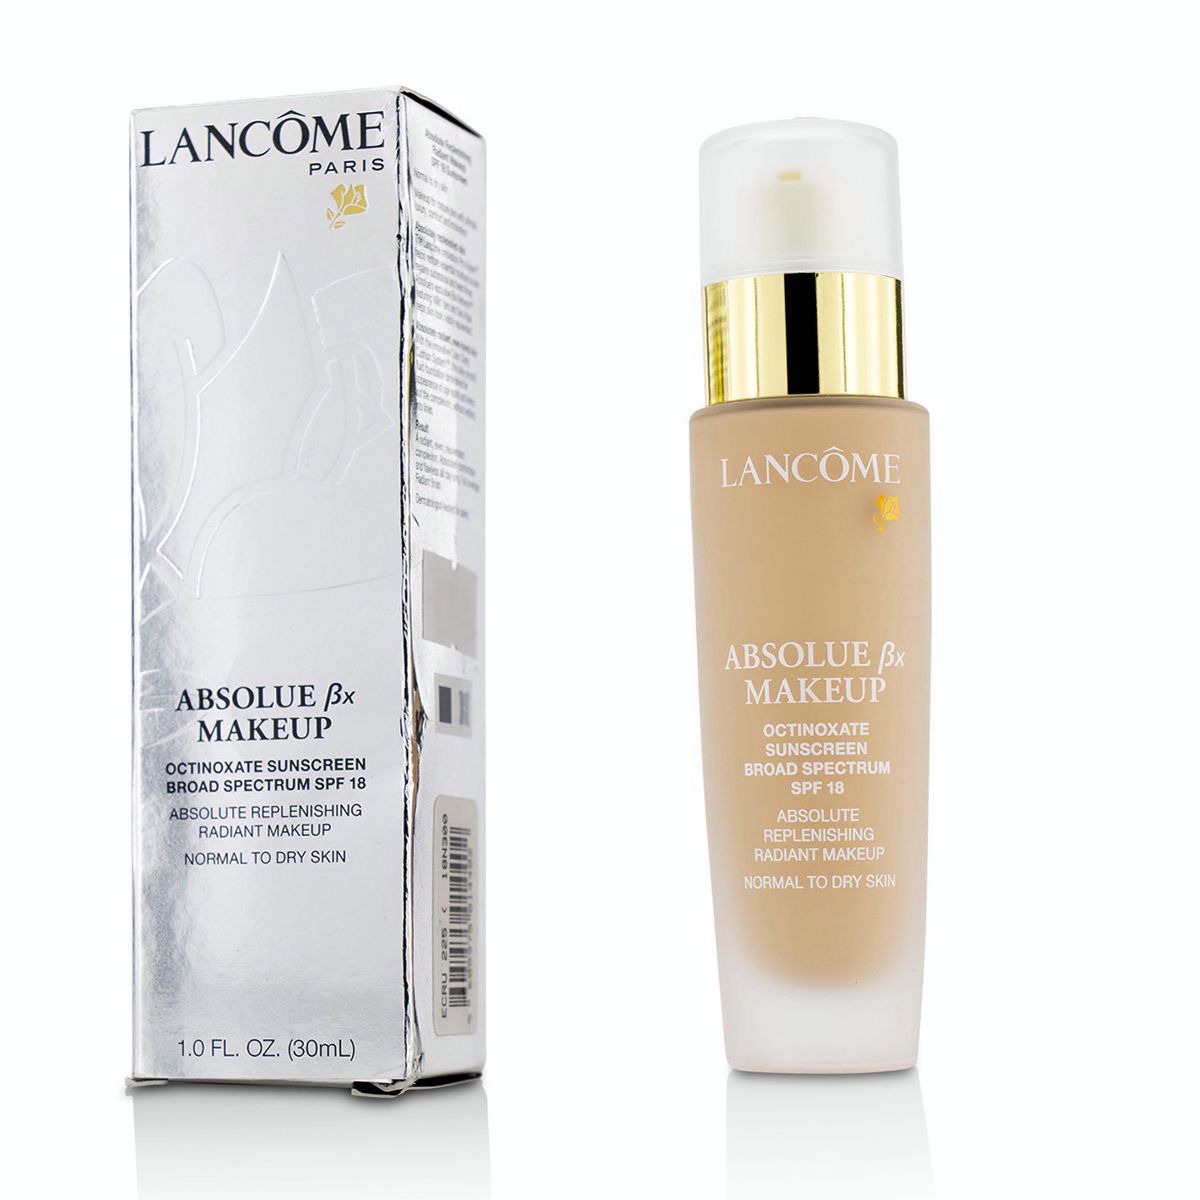 Absolue Bx Absolute Replenishing Radiant Makeup SPF 18 - # Absolute Ecru 225 C (US Version) Lancome Image